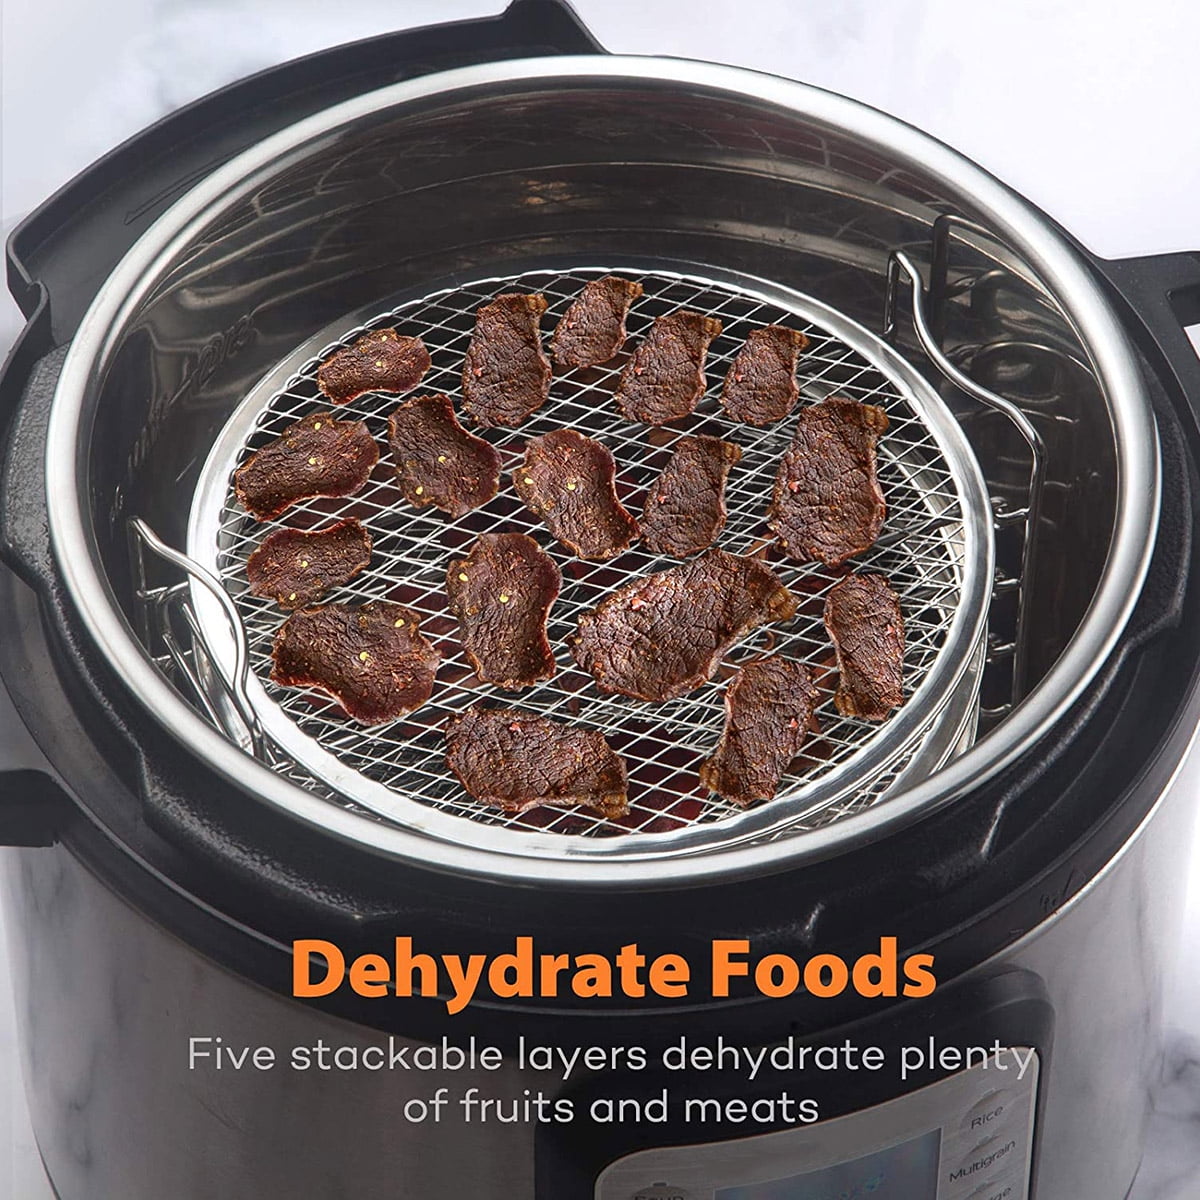 Dehydrator Rack for Ninja Foodi Accesories, Pressure Cooker and Air Fryer 6.5 Quart & 8 Quart - Stainless Steel Cooker Rack with Five Stackable